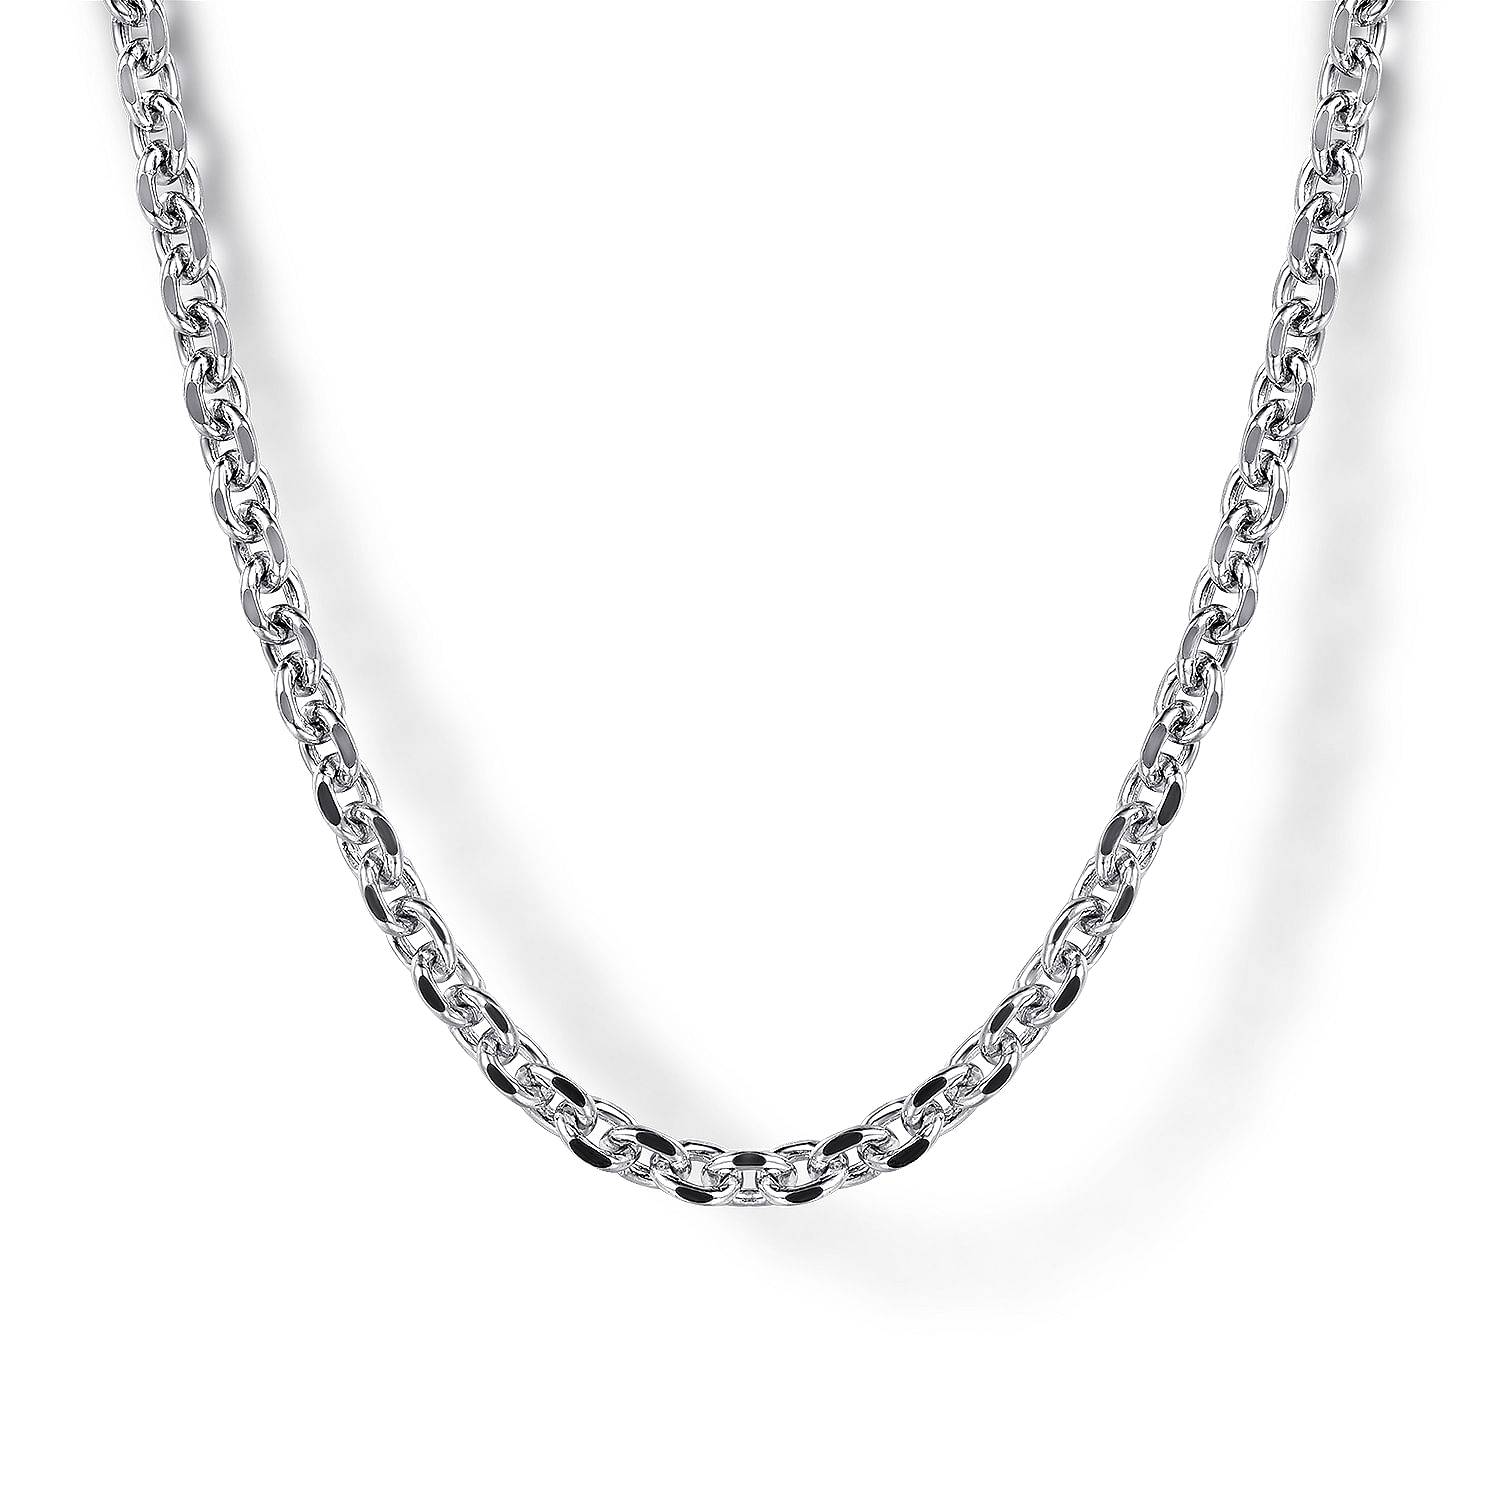 22-Inch-925-Sterling-Silver-Men's-Link-Chain-Necklace1